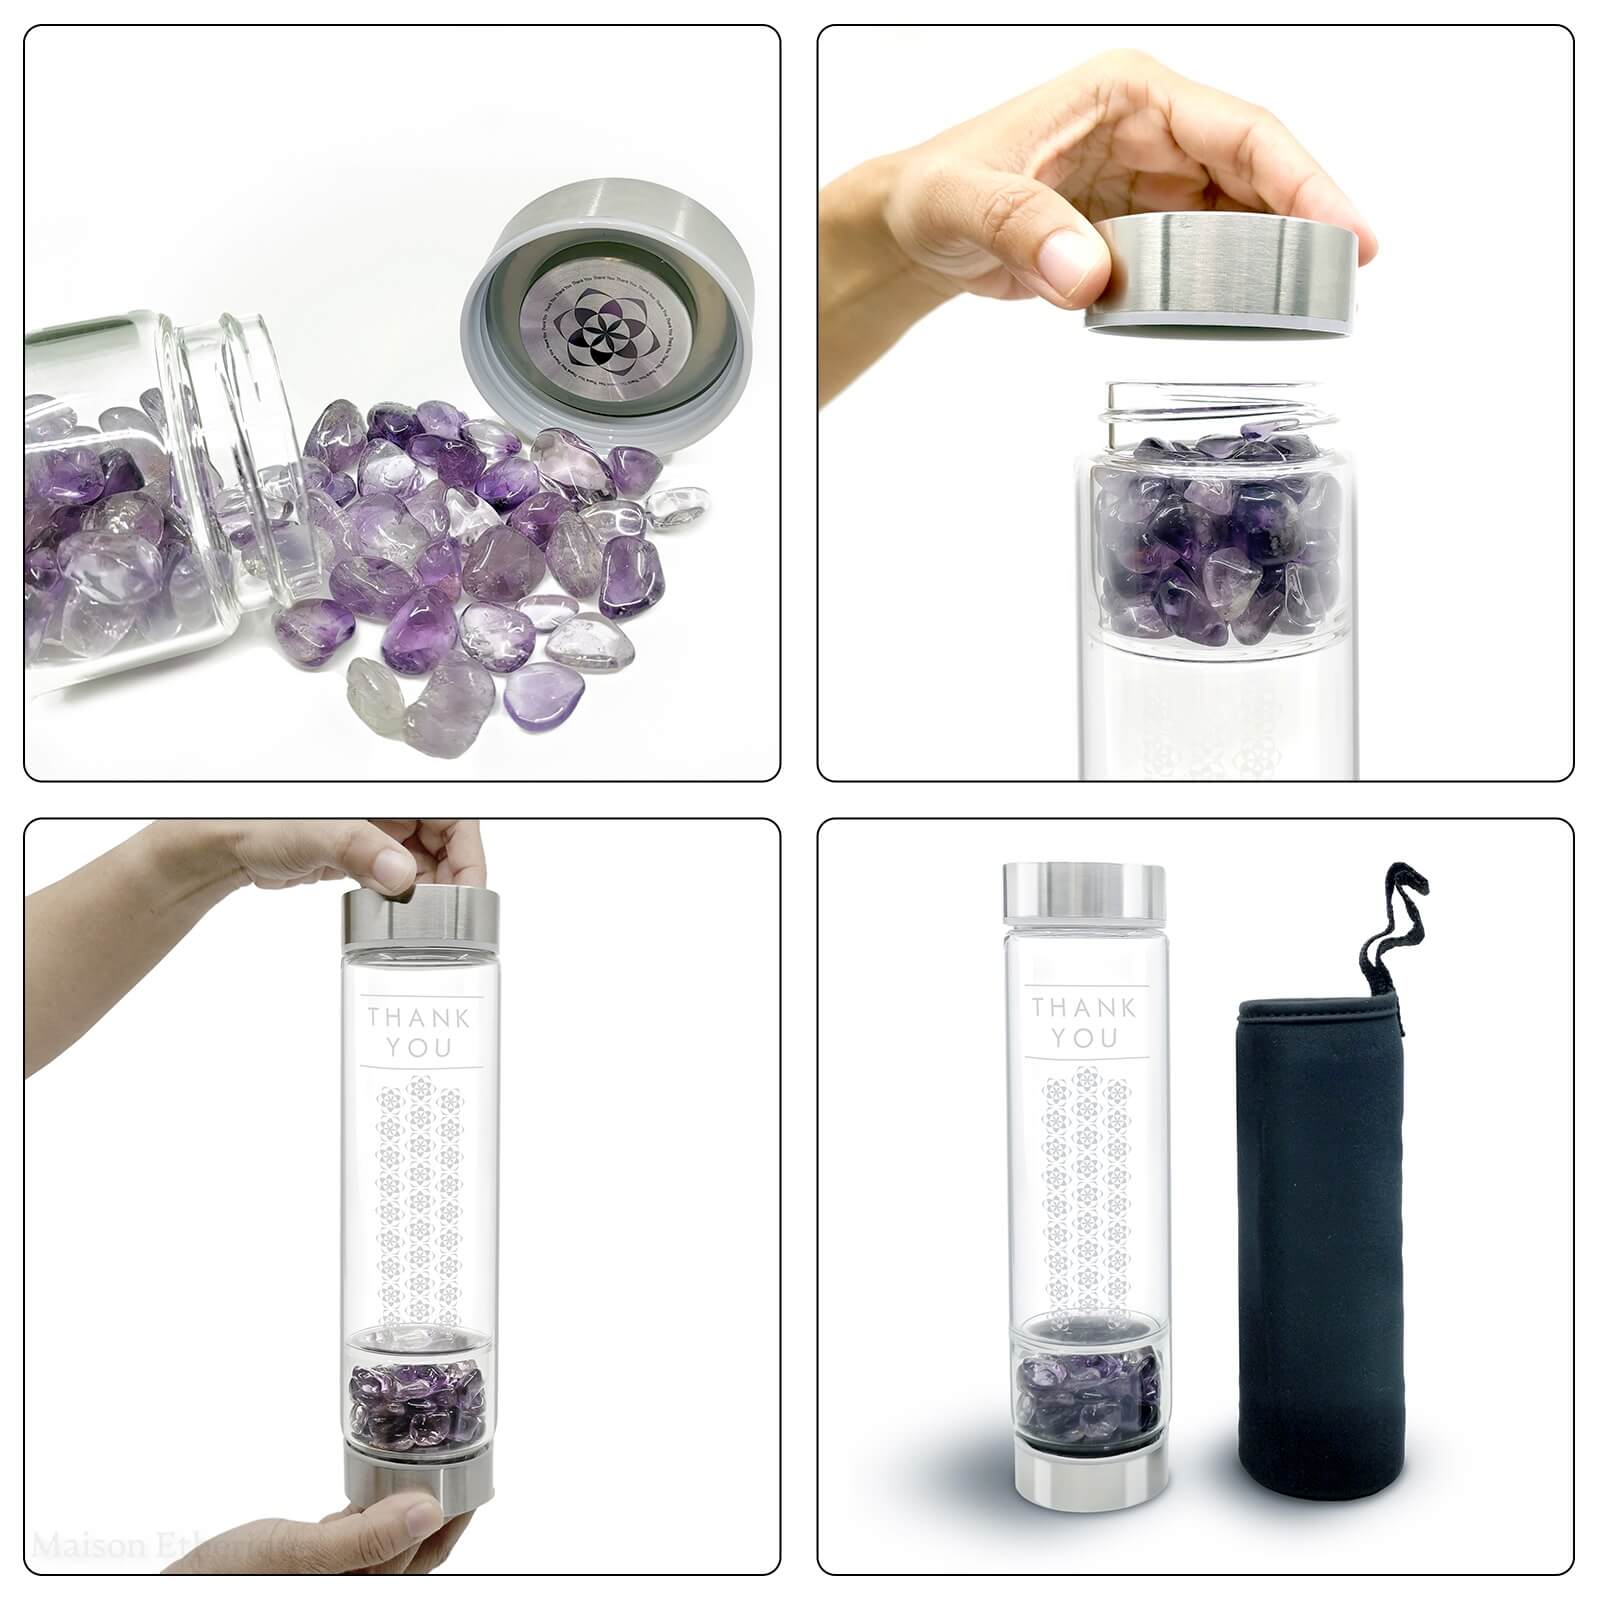 A Gratitude Crystal Bottle with Tumbled Amethyst - parts